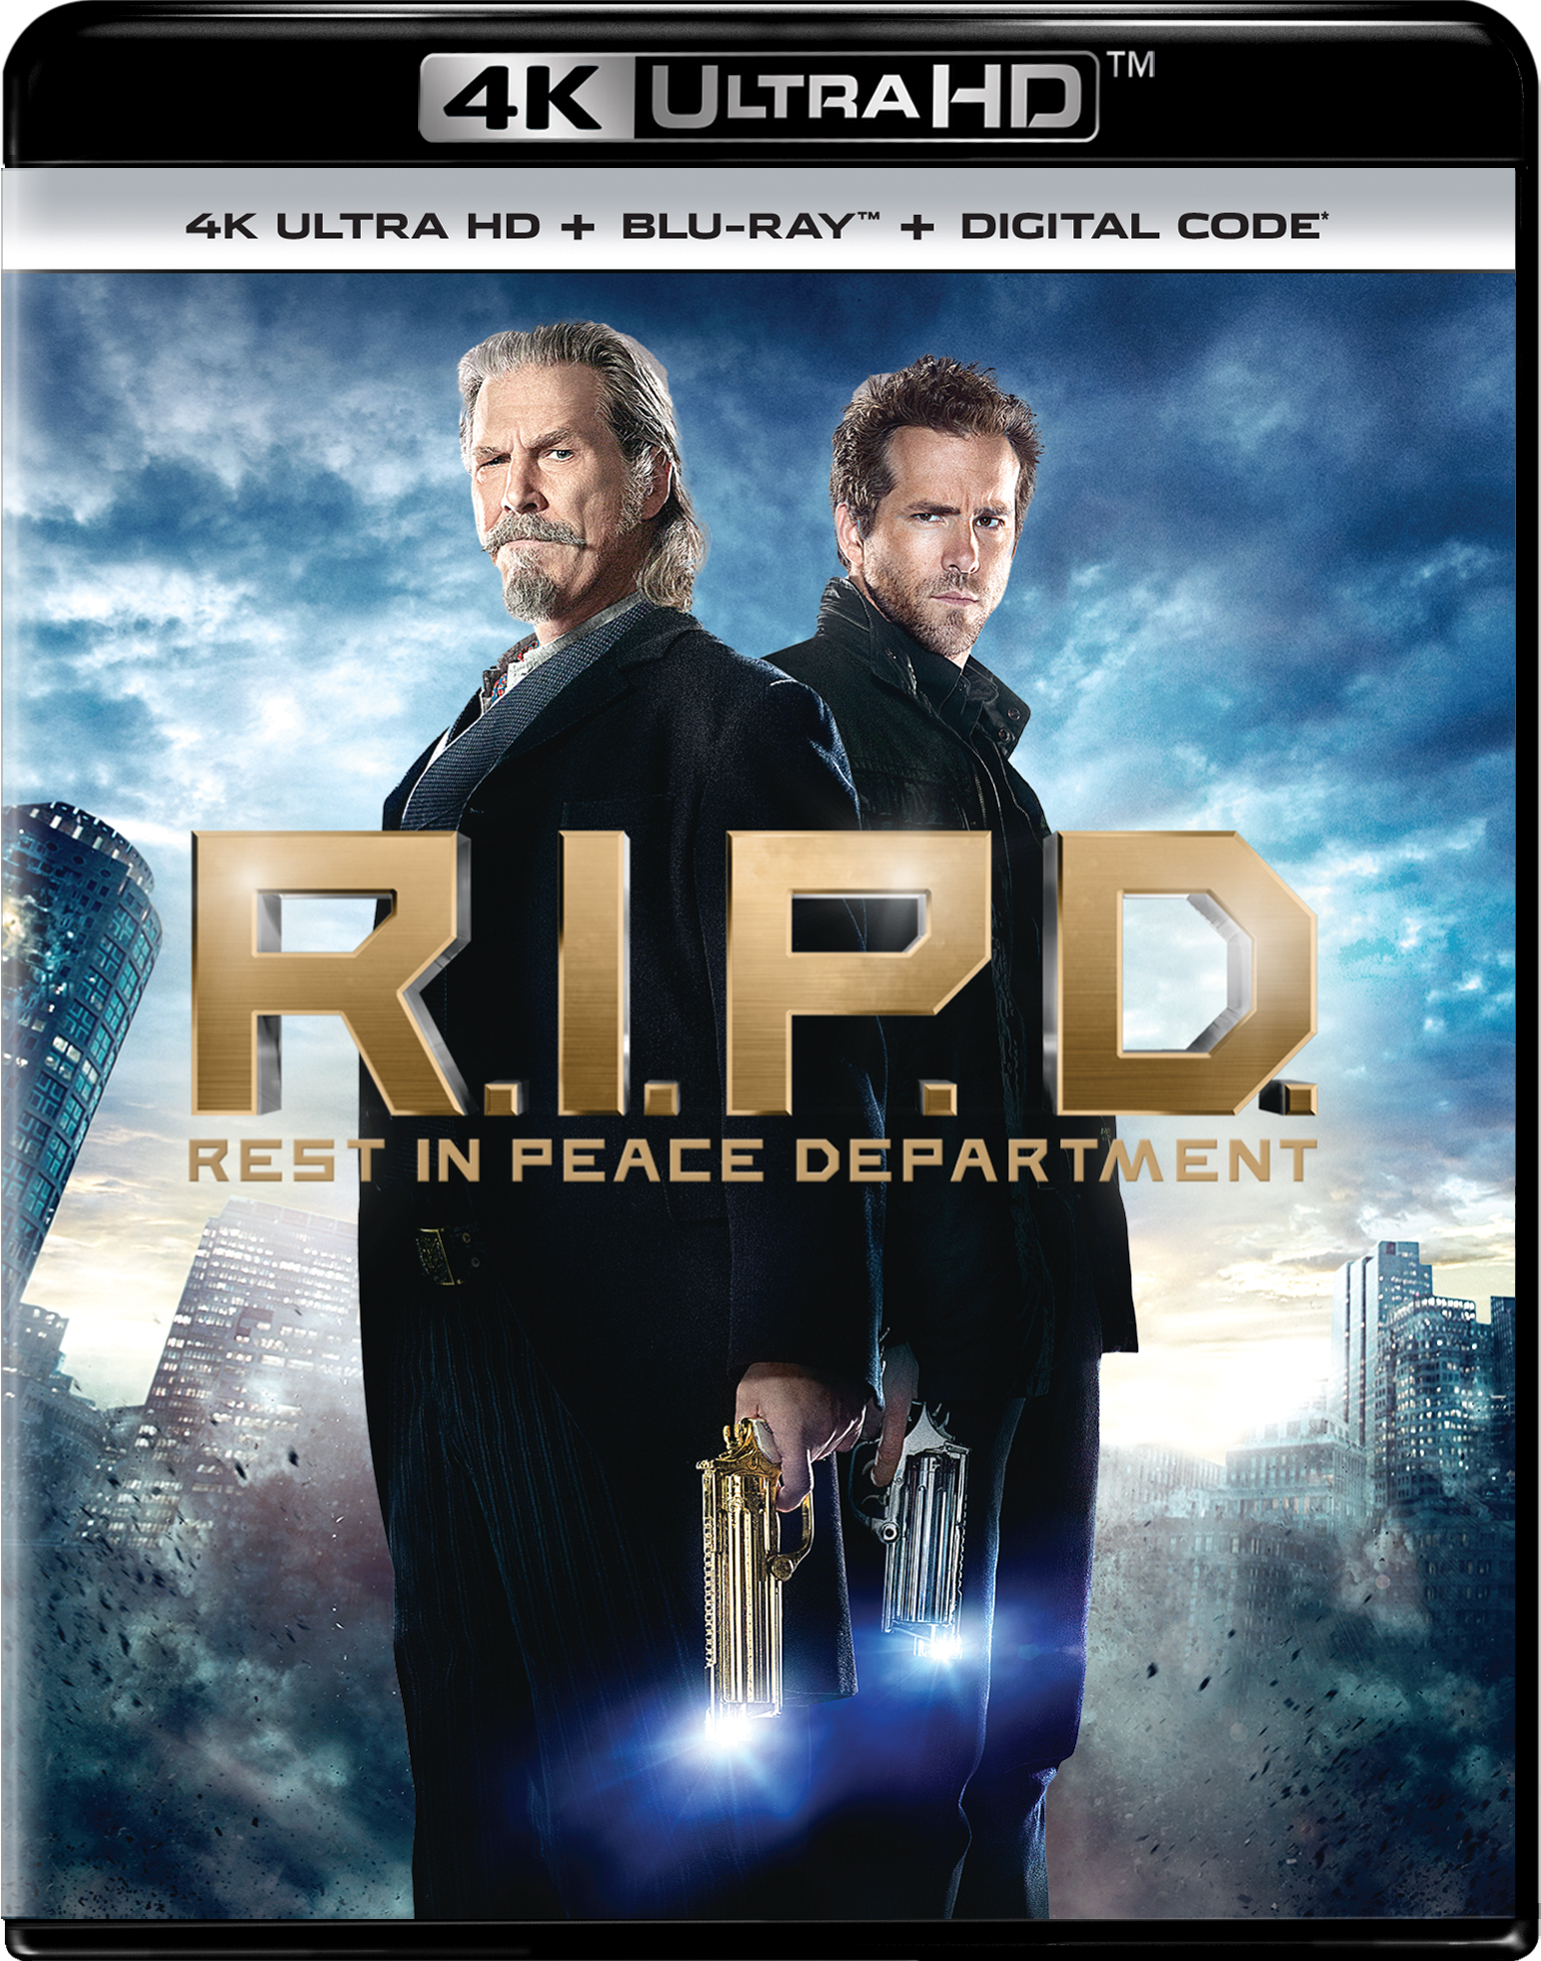 R.I.P.D.' is worth watching, but wait for DVD release